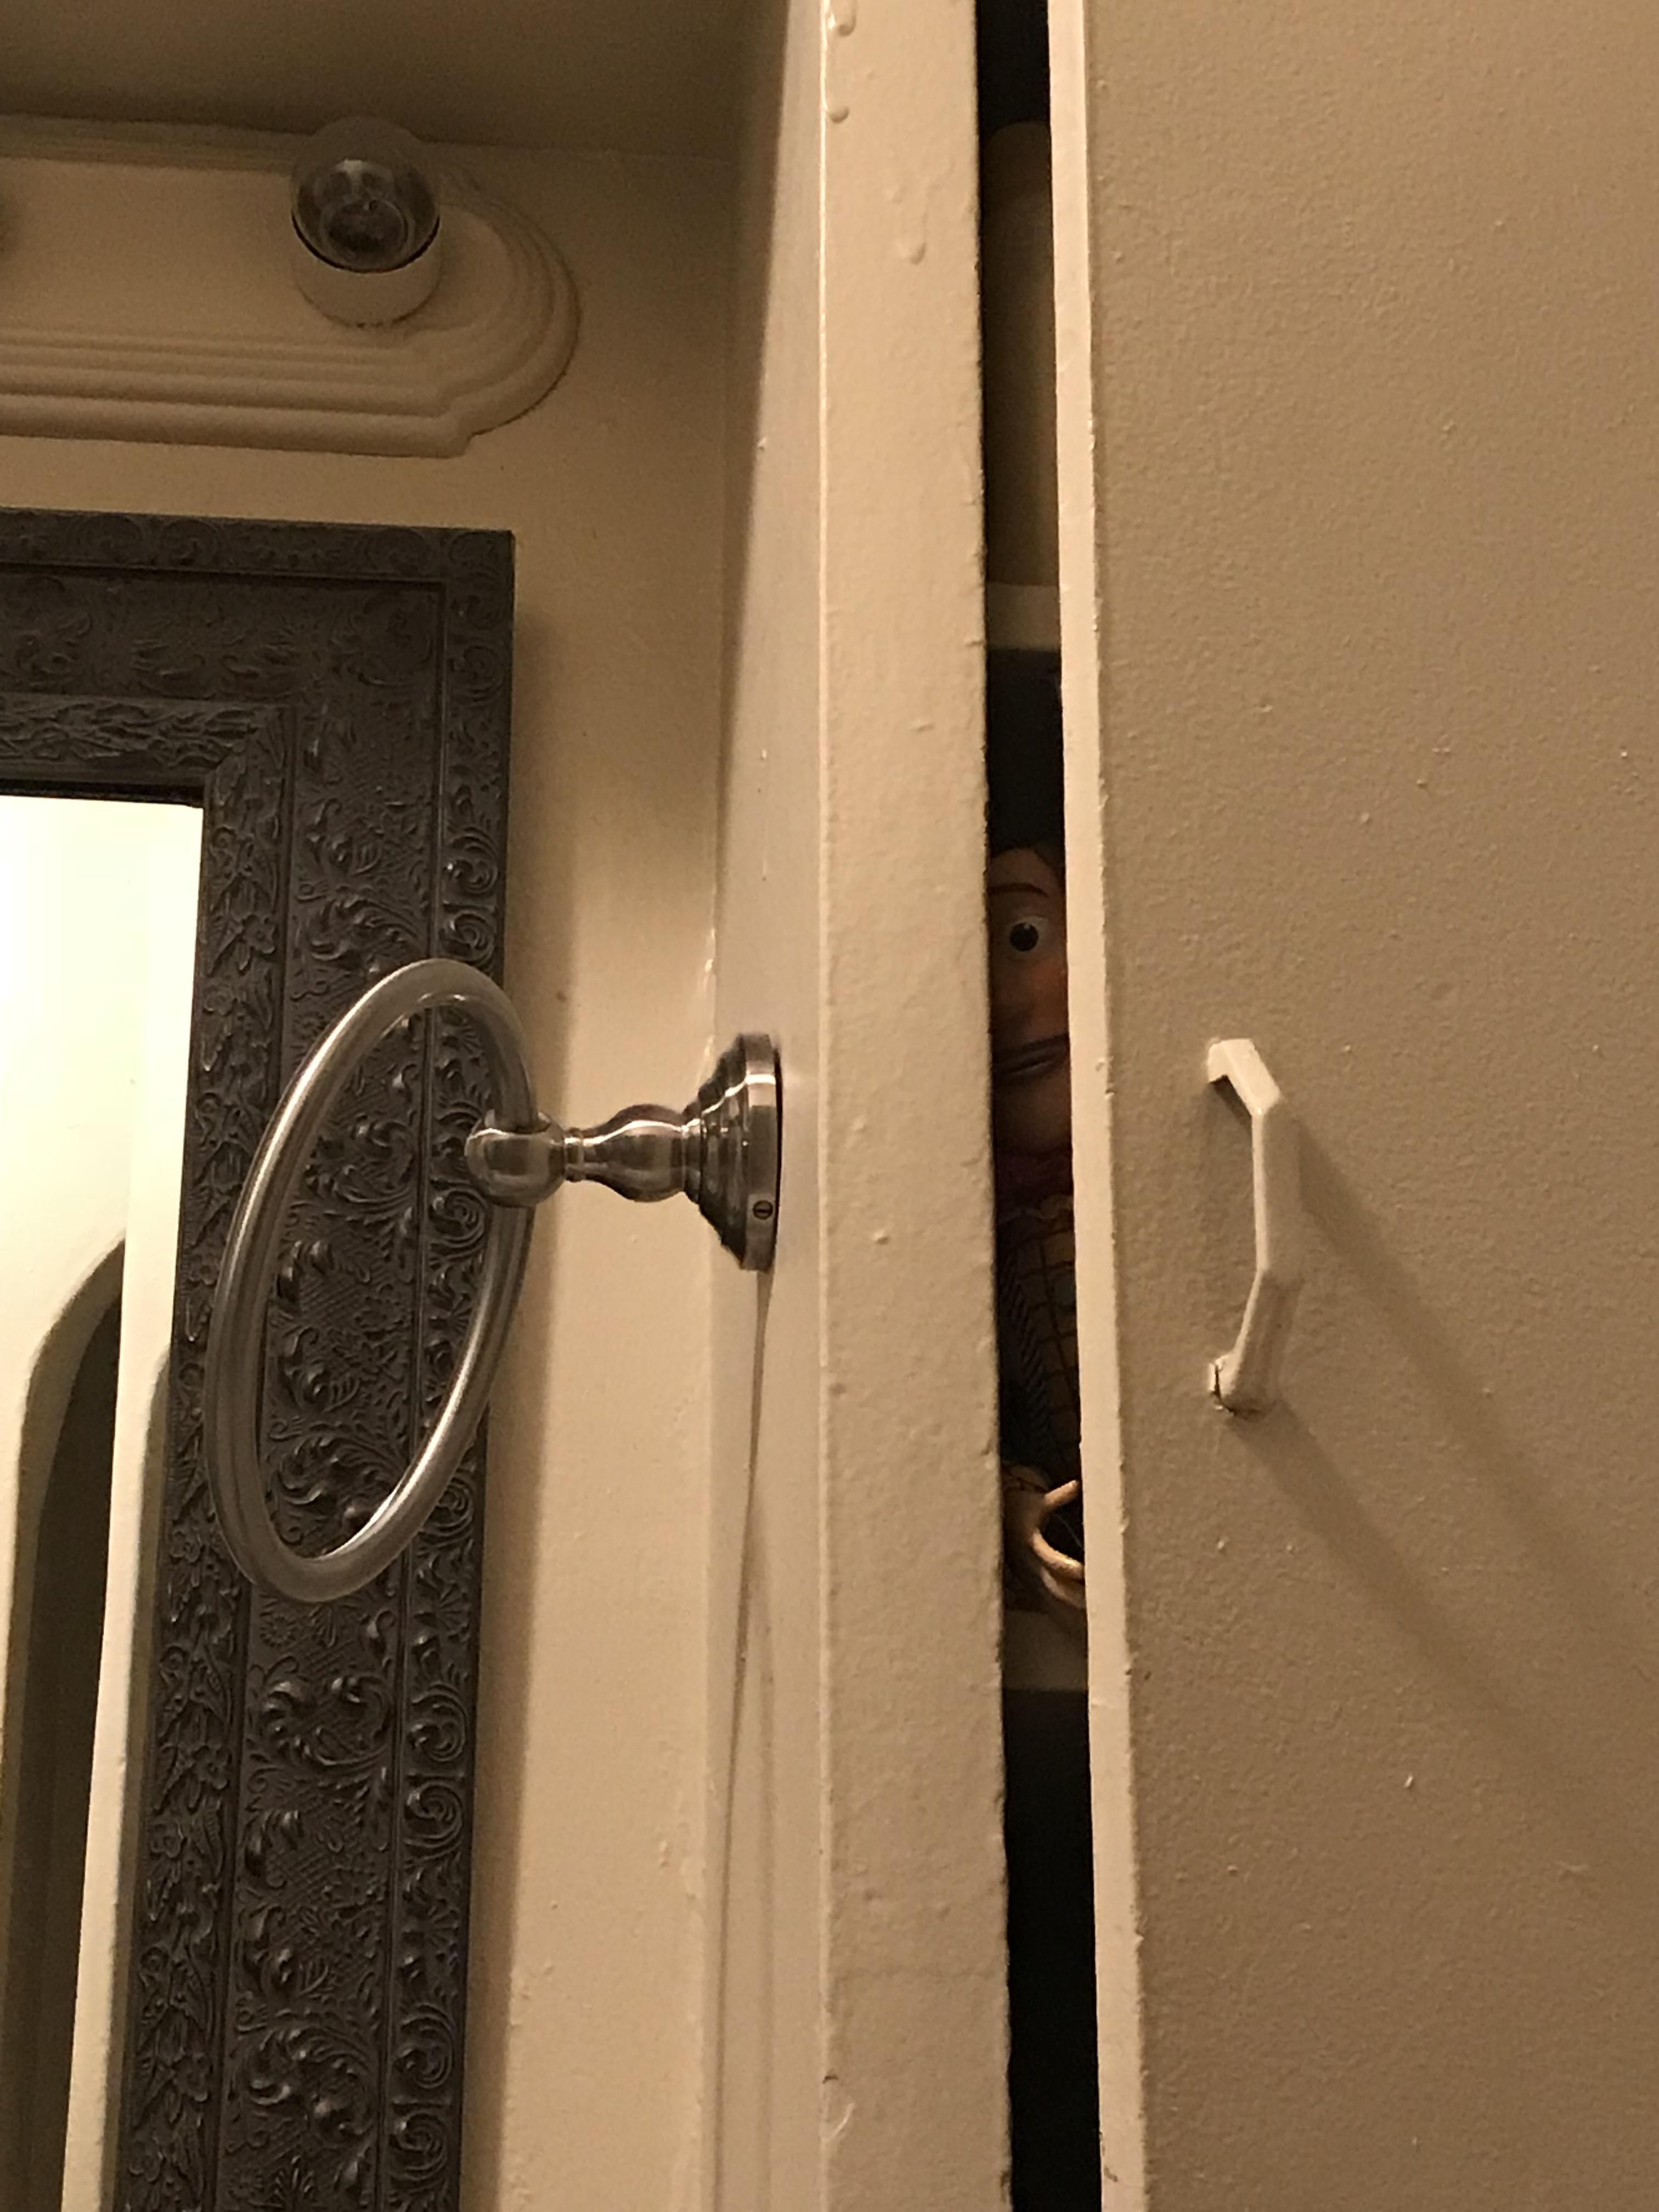 Looked up and noticed this while using the bathroom.